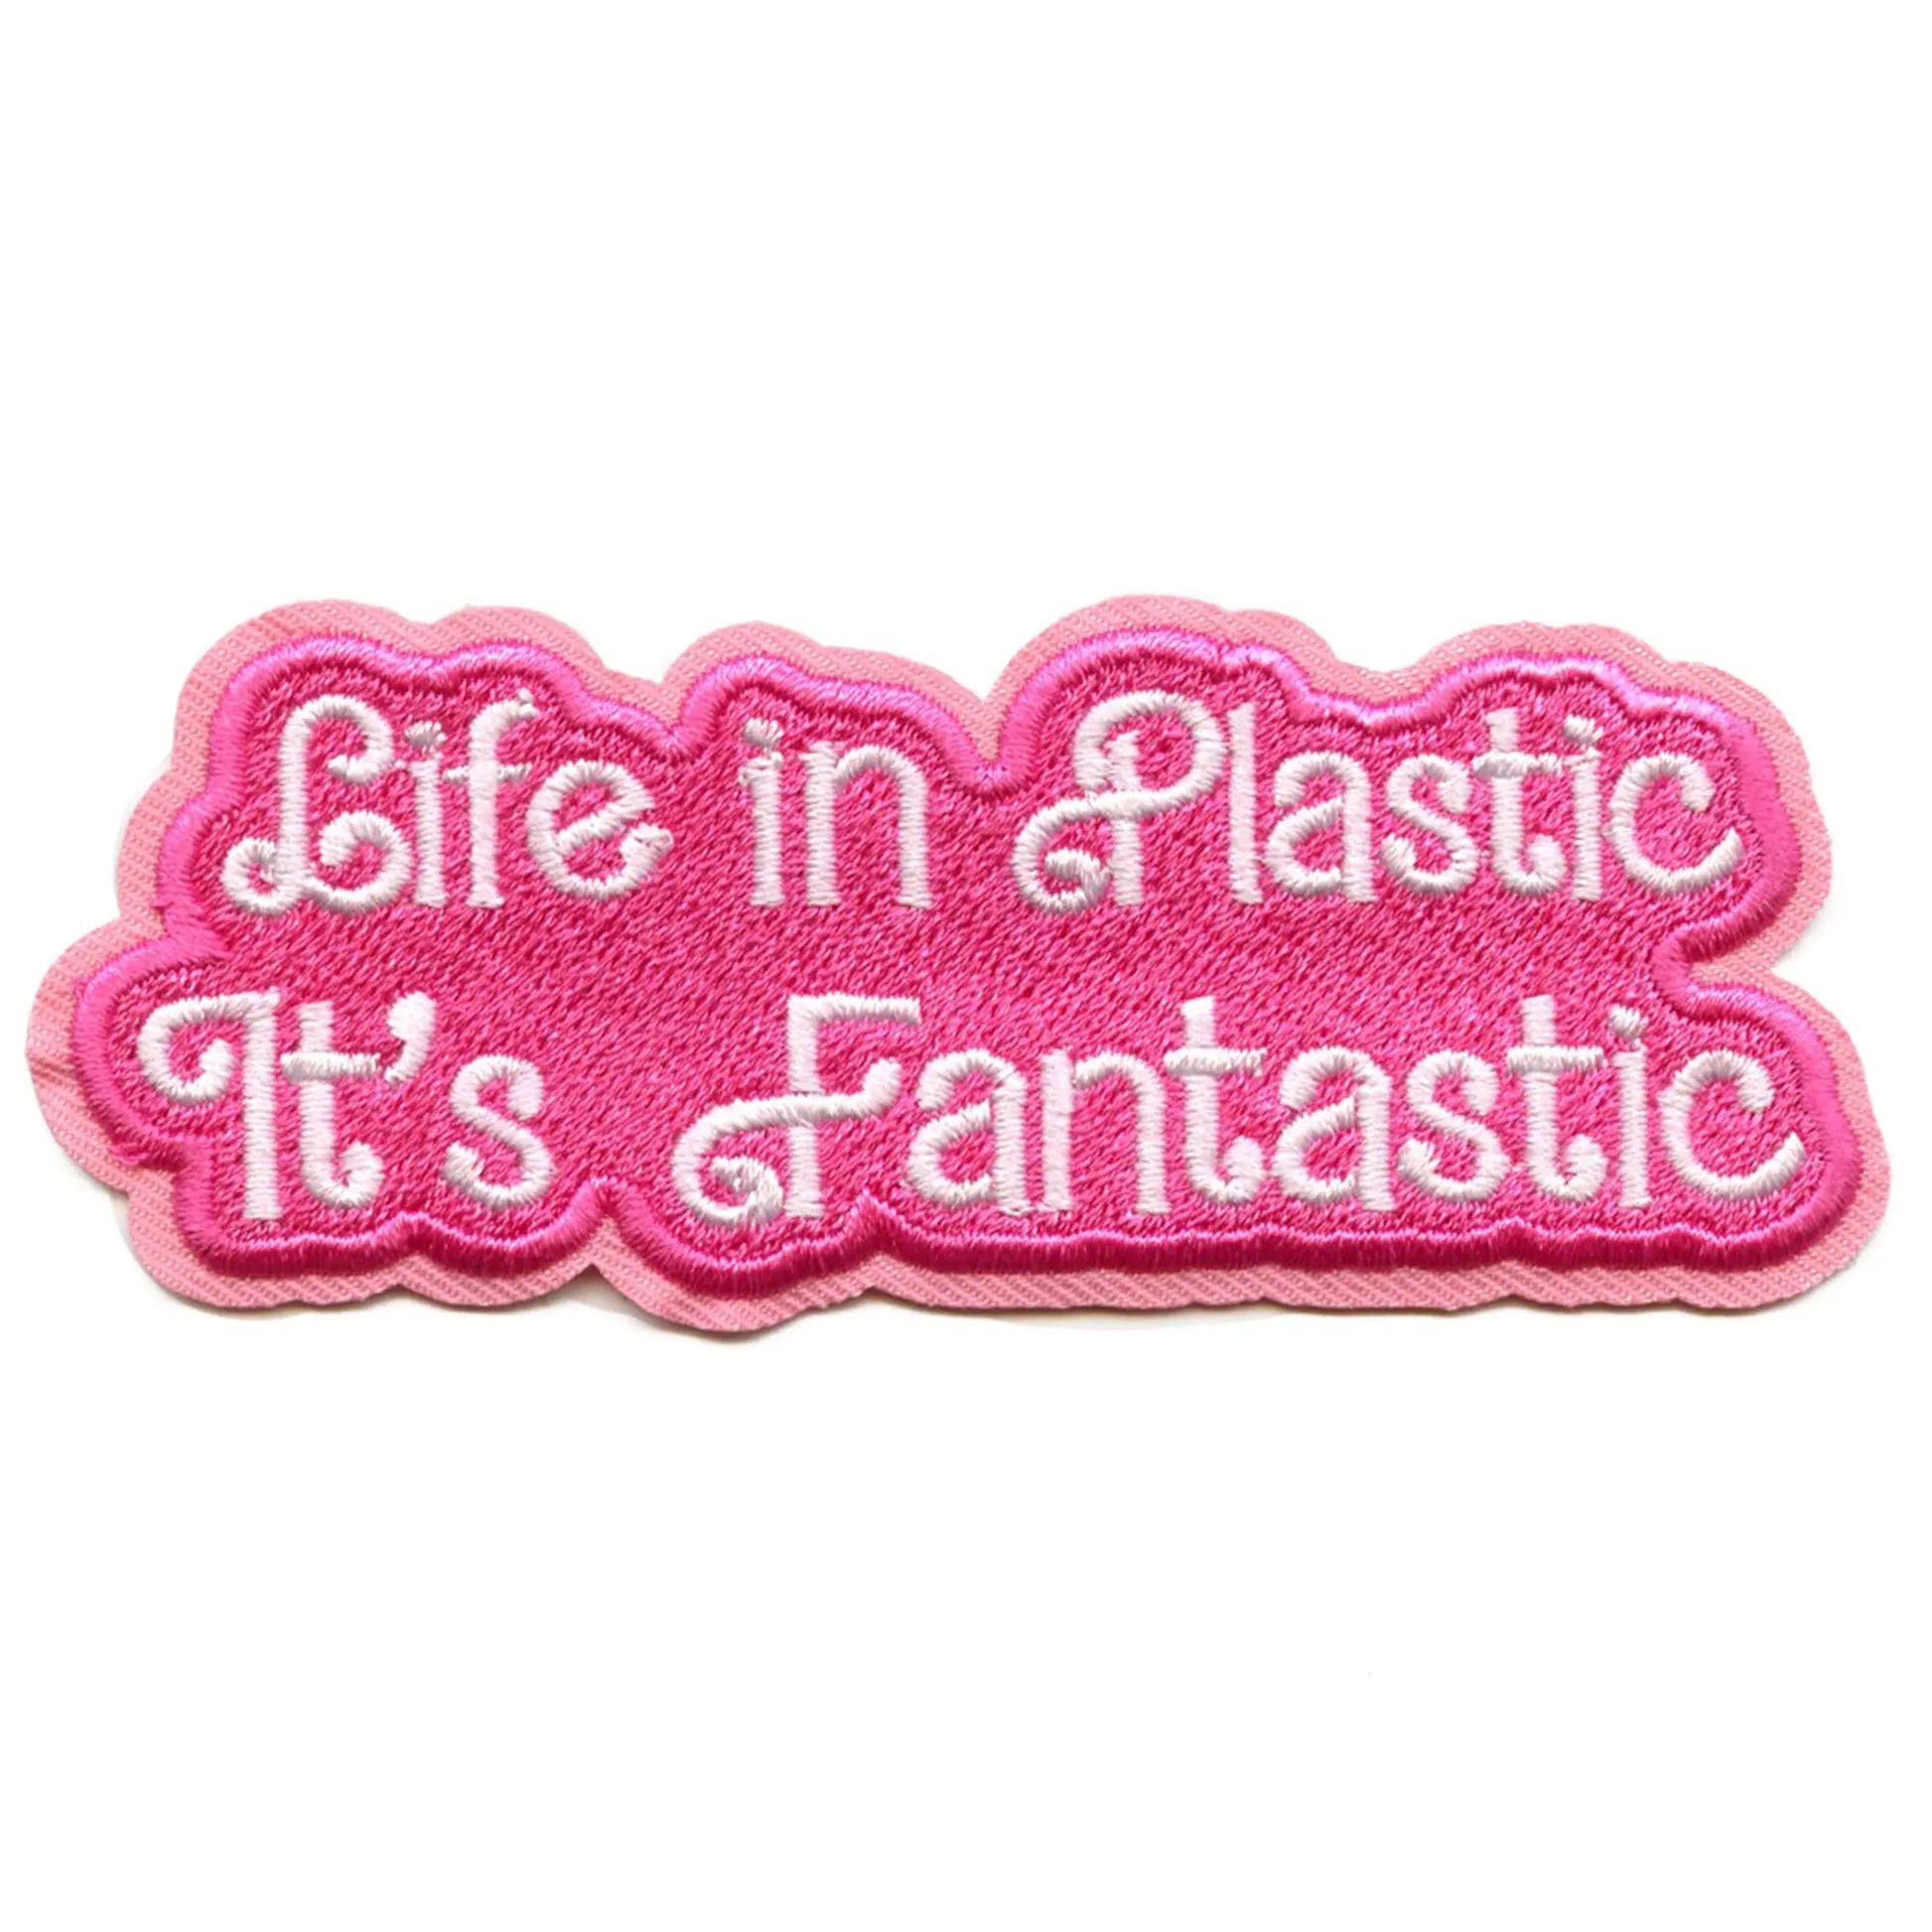 Life In Plastic Patch It's Fantastic Phrase Pink Embroidered Iron On P